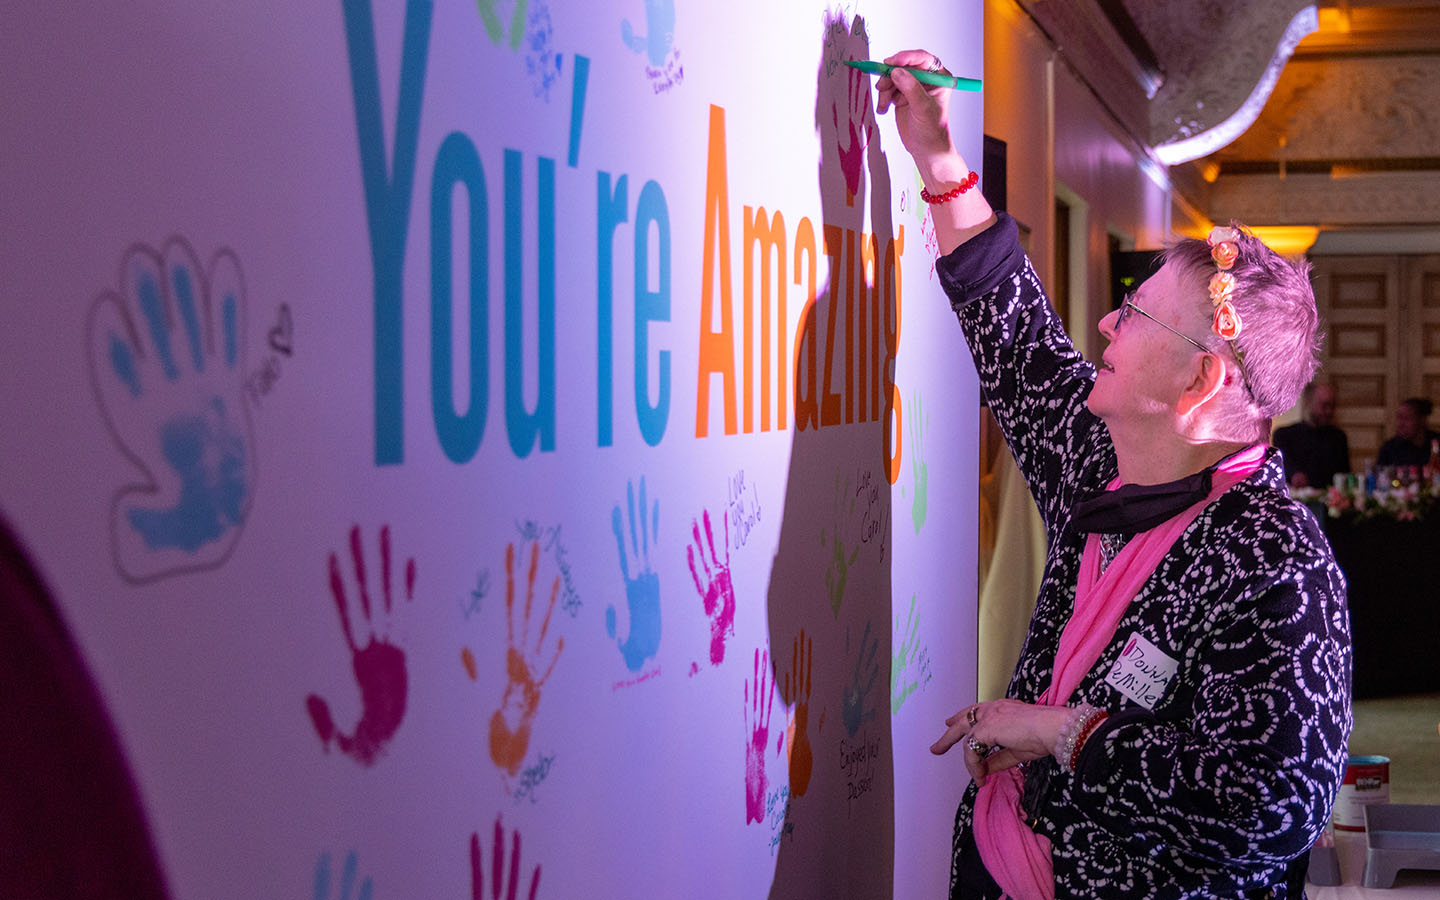 A person signs a wall-sized poster during Dr. Carol Brown's memorial.